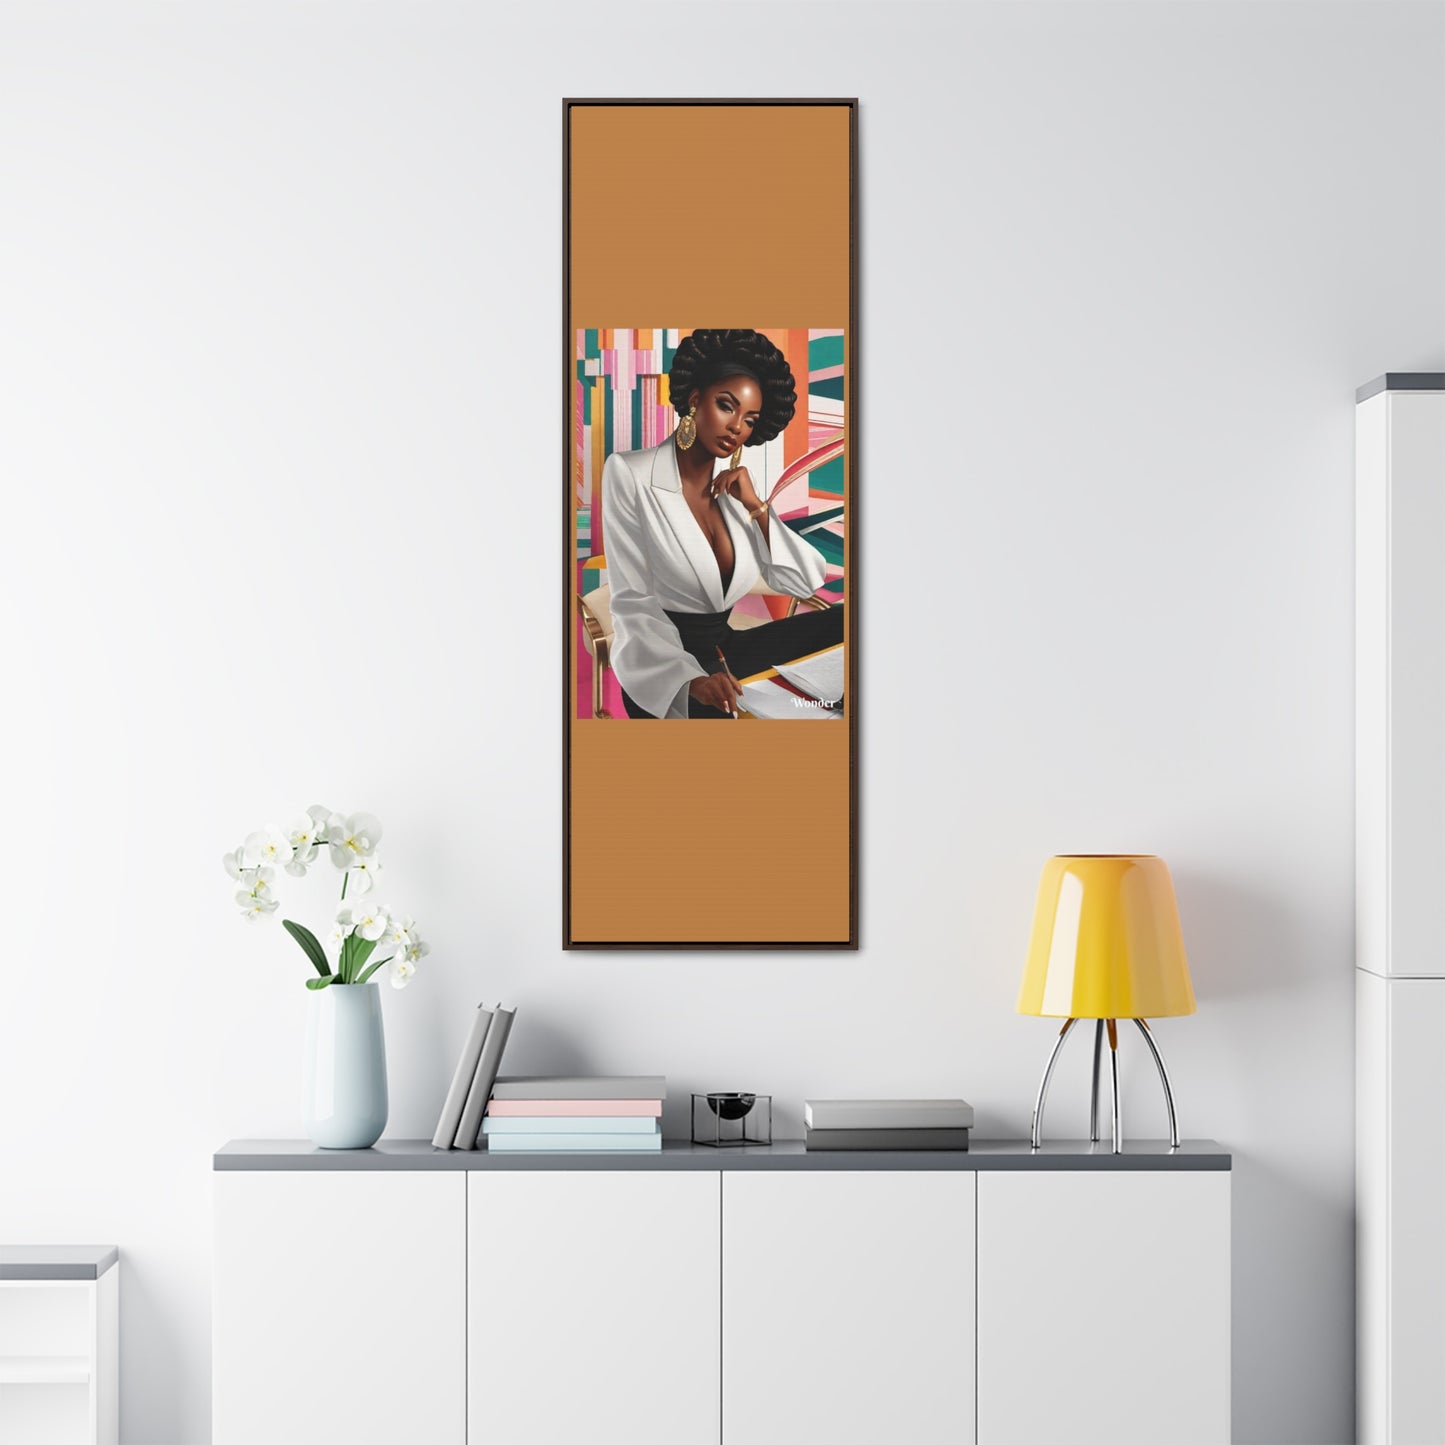 Gallery Canvas Wraps, Vertical Frame